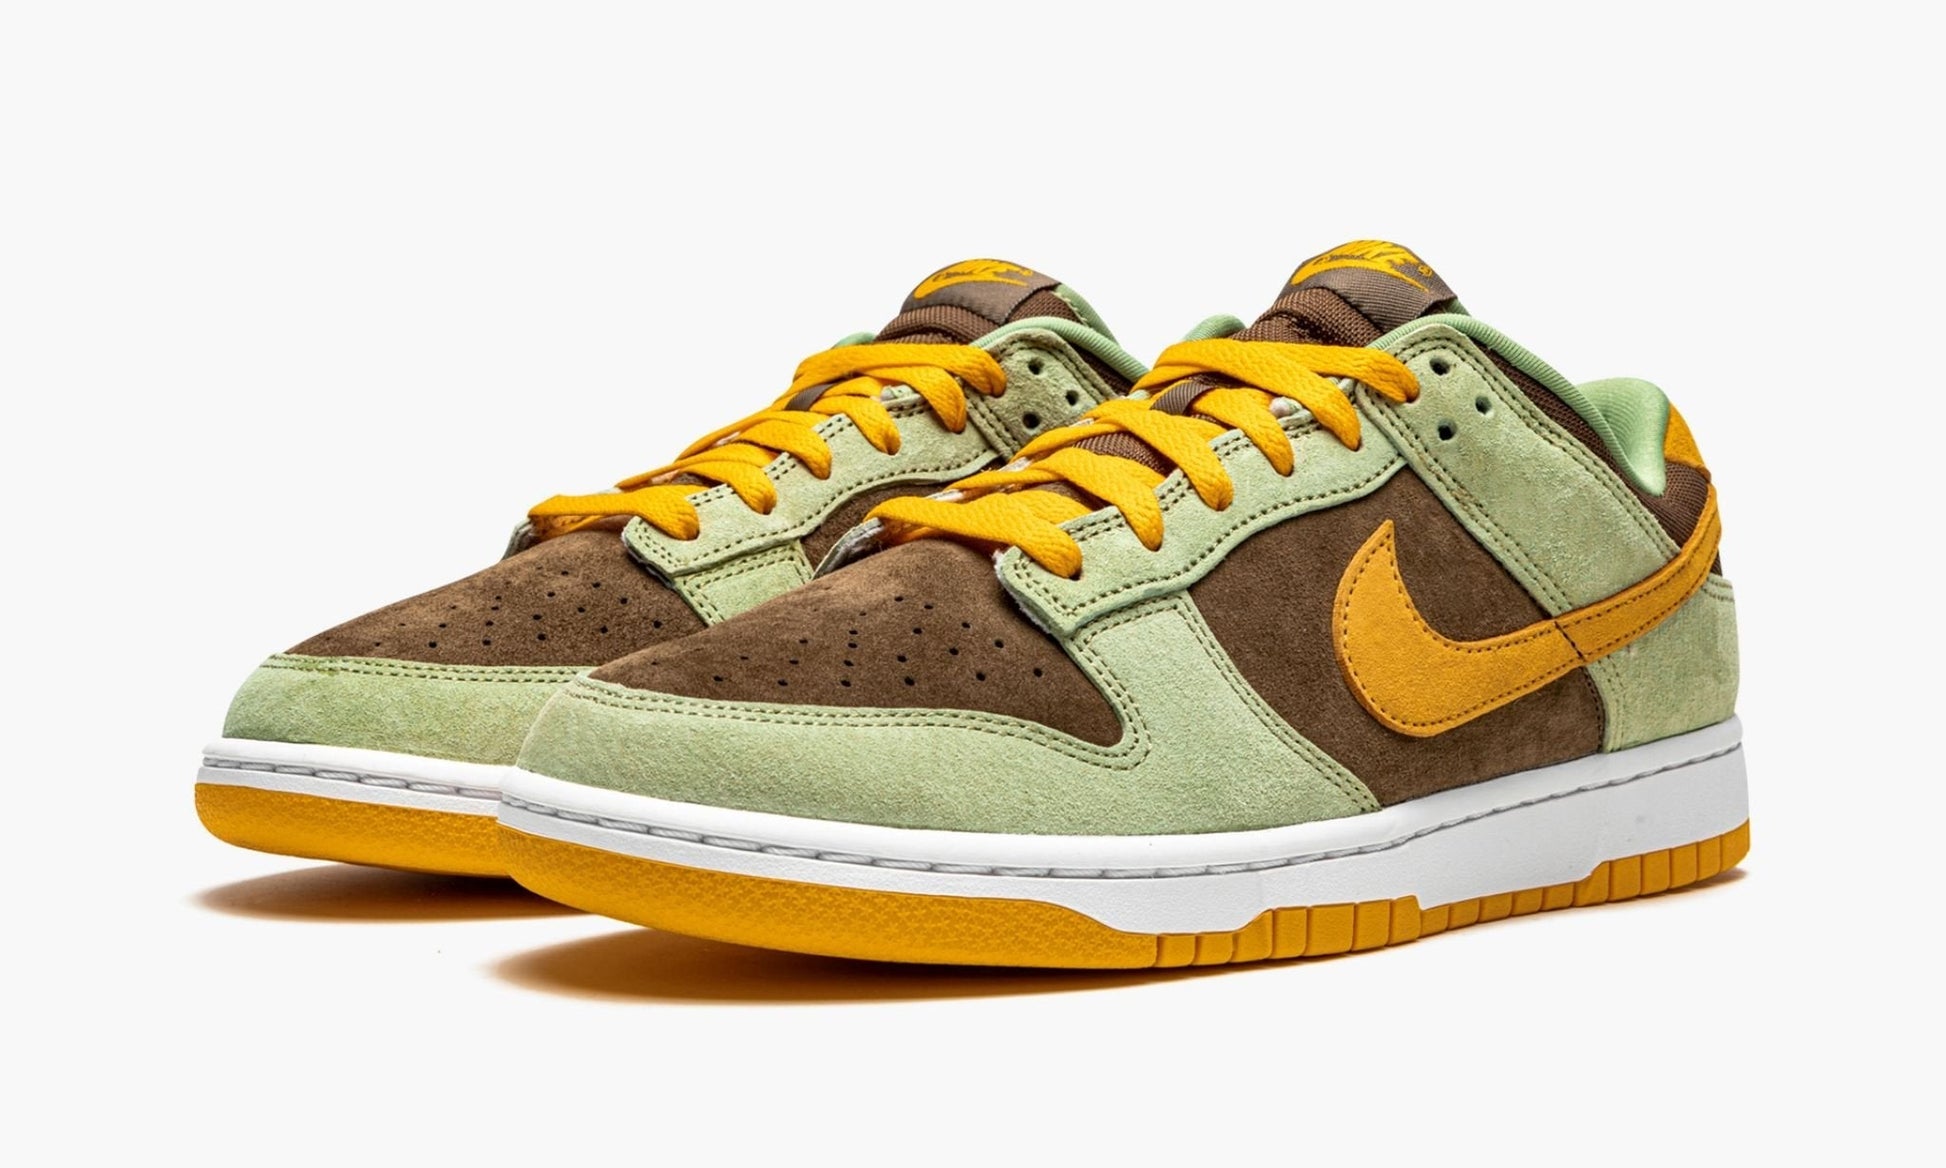 Dunk Low "Dusty Olive"